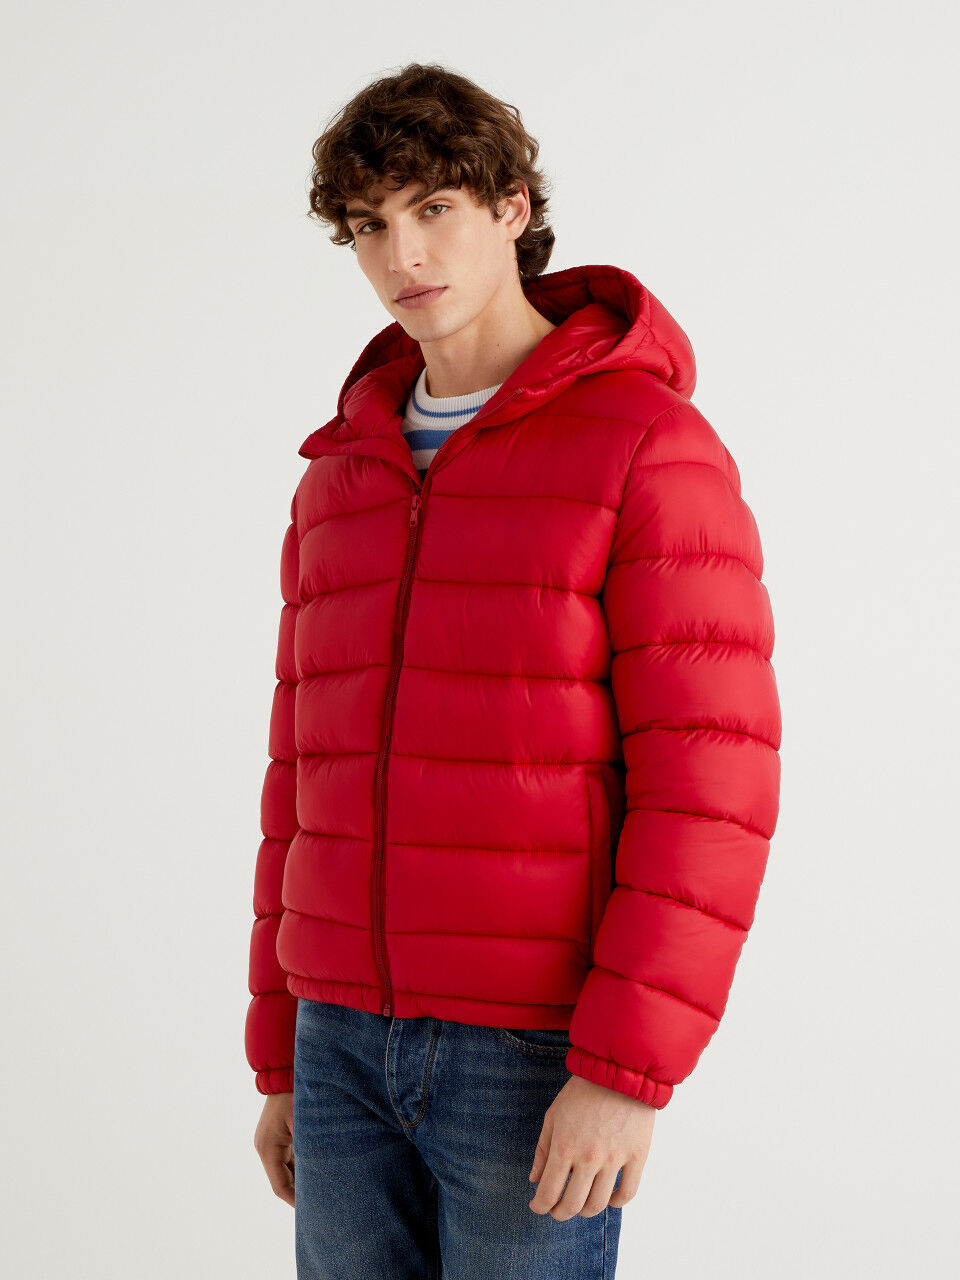 Men's Mountain Classic Puffer Jacket | Insulated Jackets at L.L.Bean